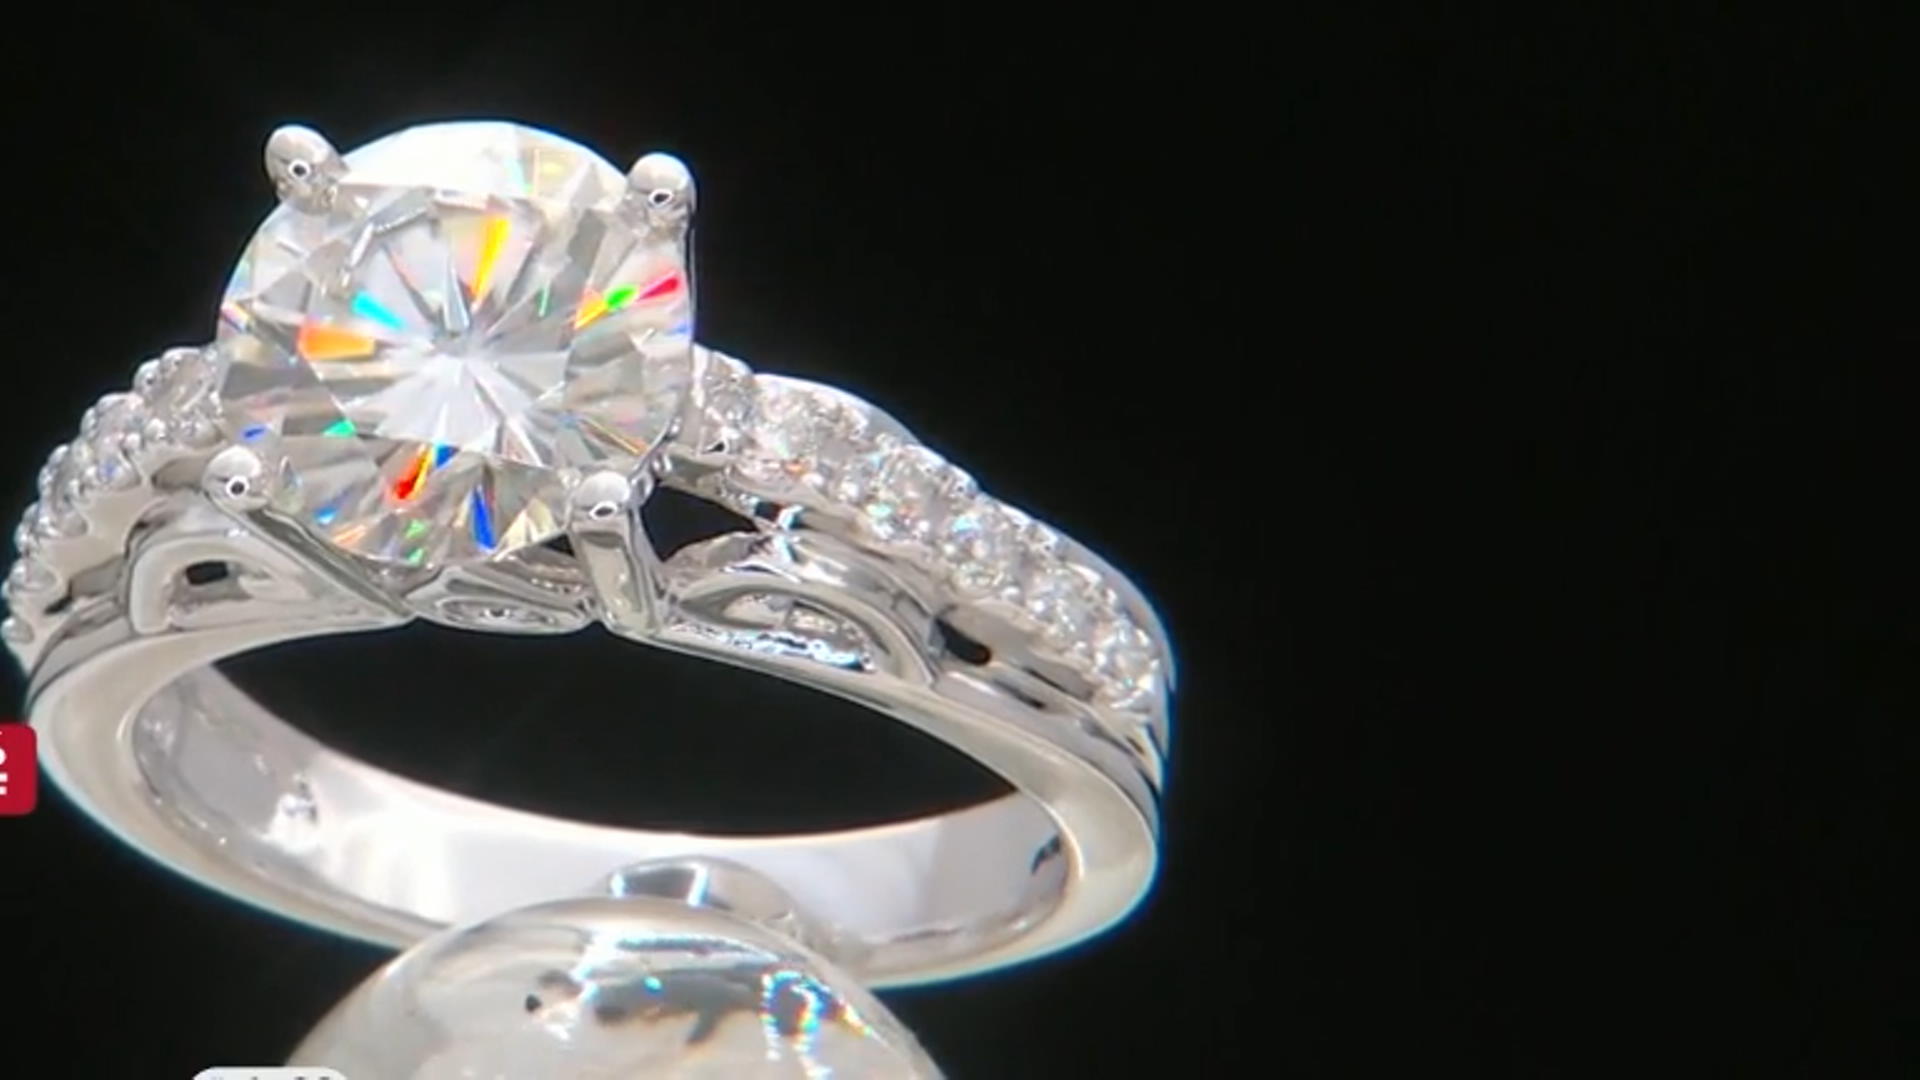 Moissanite 14k Yellow Gold Over Sterling Silver Ring 2.92ctw DEW Video Thumbnail